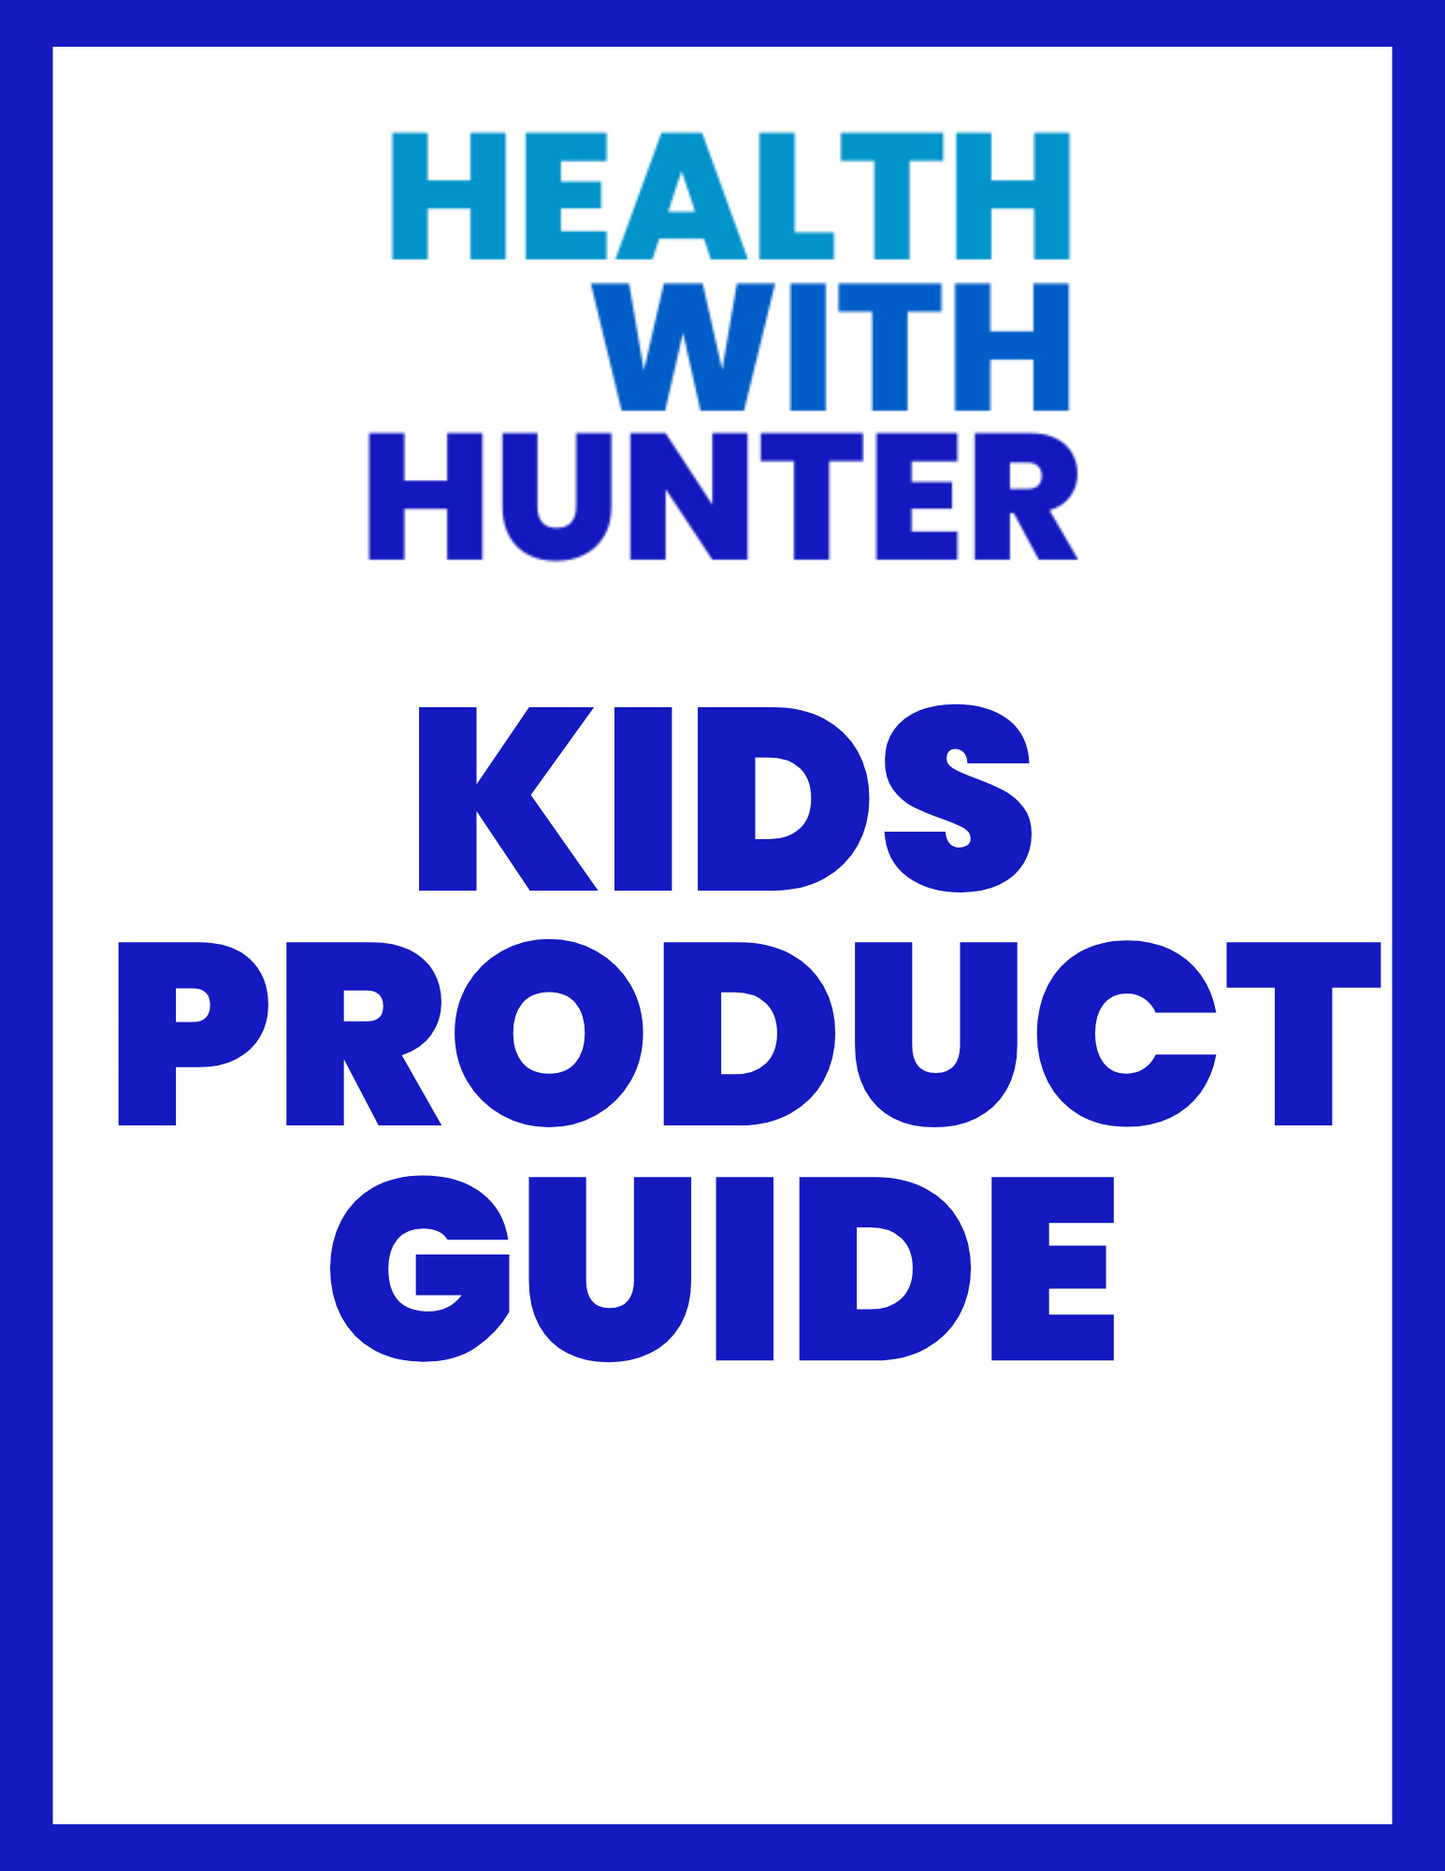 Kids Product Guide